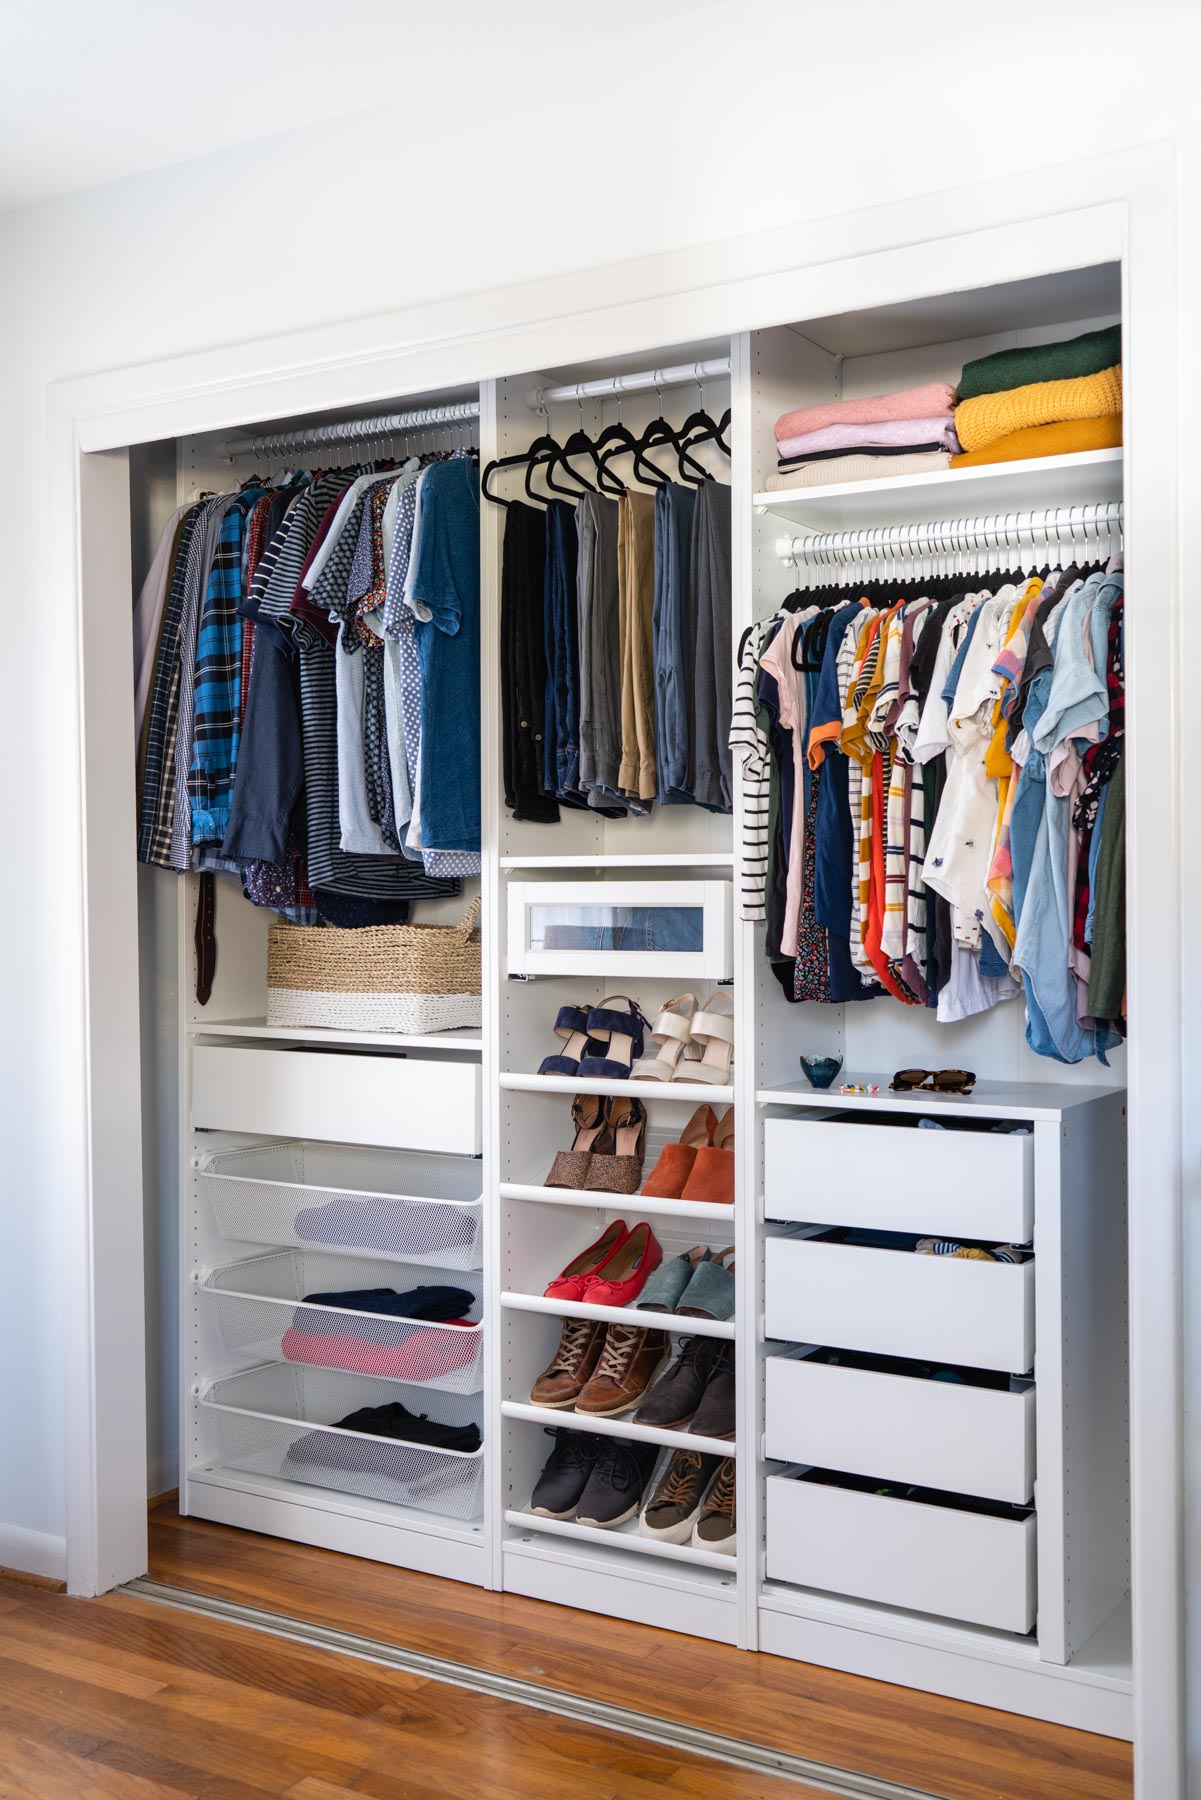 Ikea Pax Wardrobe Ideas For Your Dream, Ikea Clothes Storage Solutions